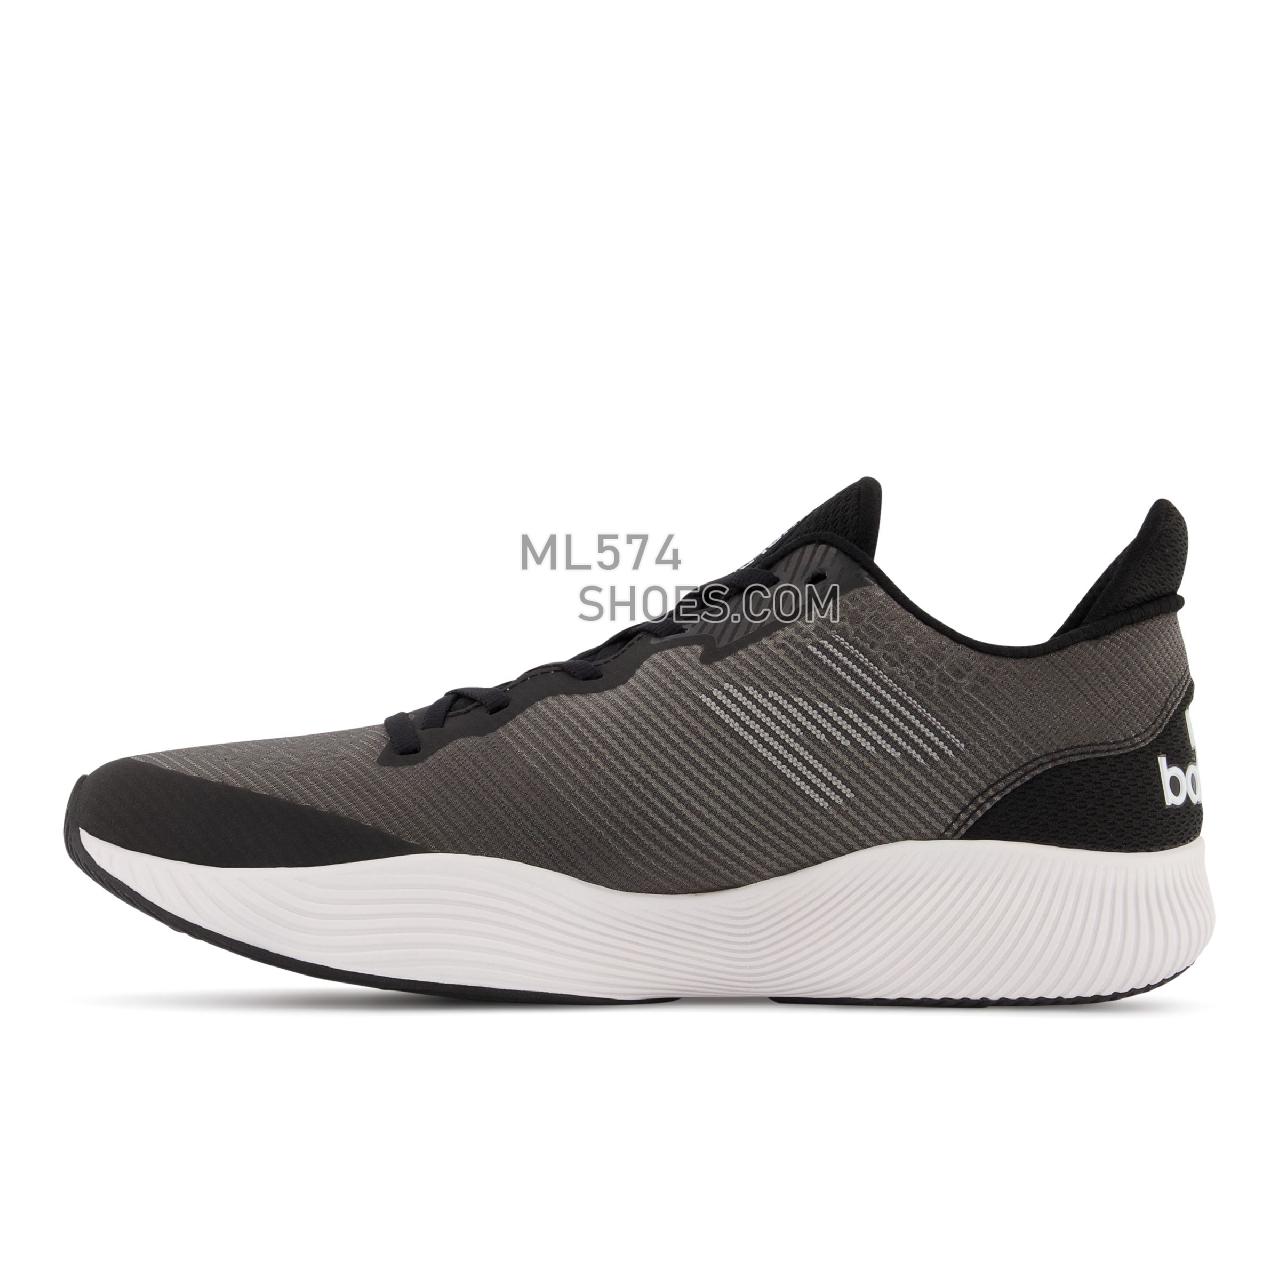 New Balance FuelCell Shift TR - Men's Cross-Training - Black with White - MXSHFTLK